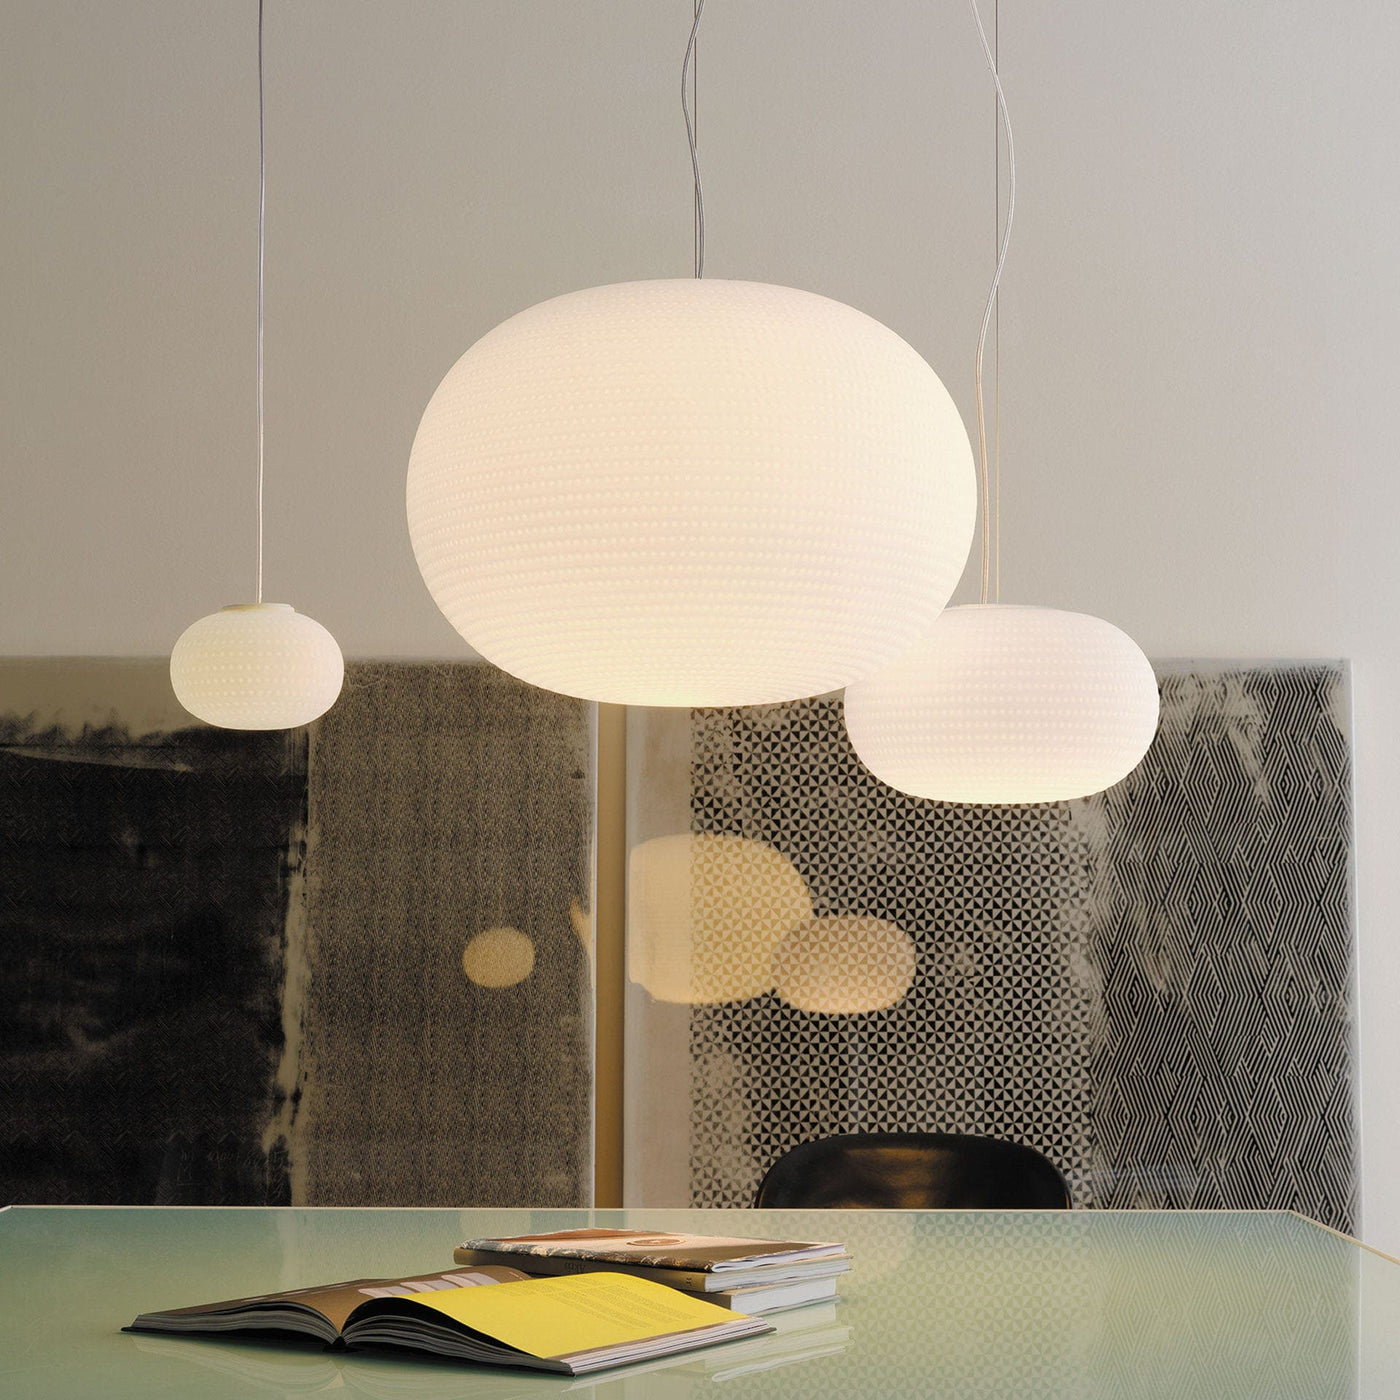 Suspension Lamp BIANCA Small by Matti Klenell for FontanaArte 01